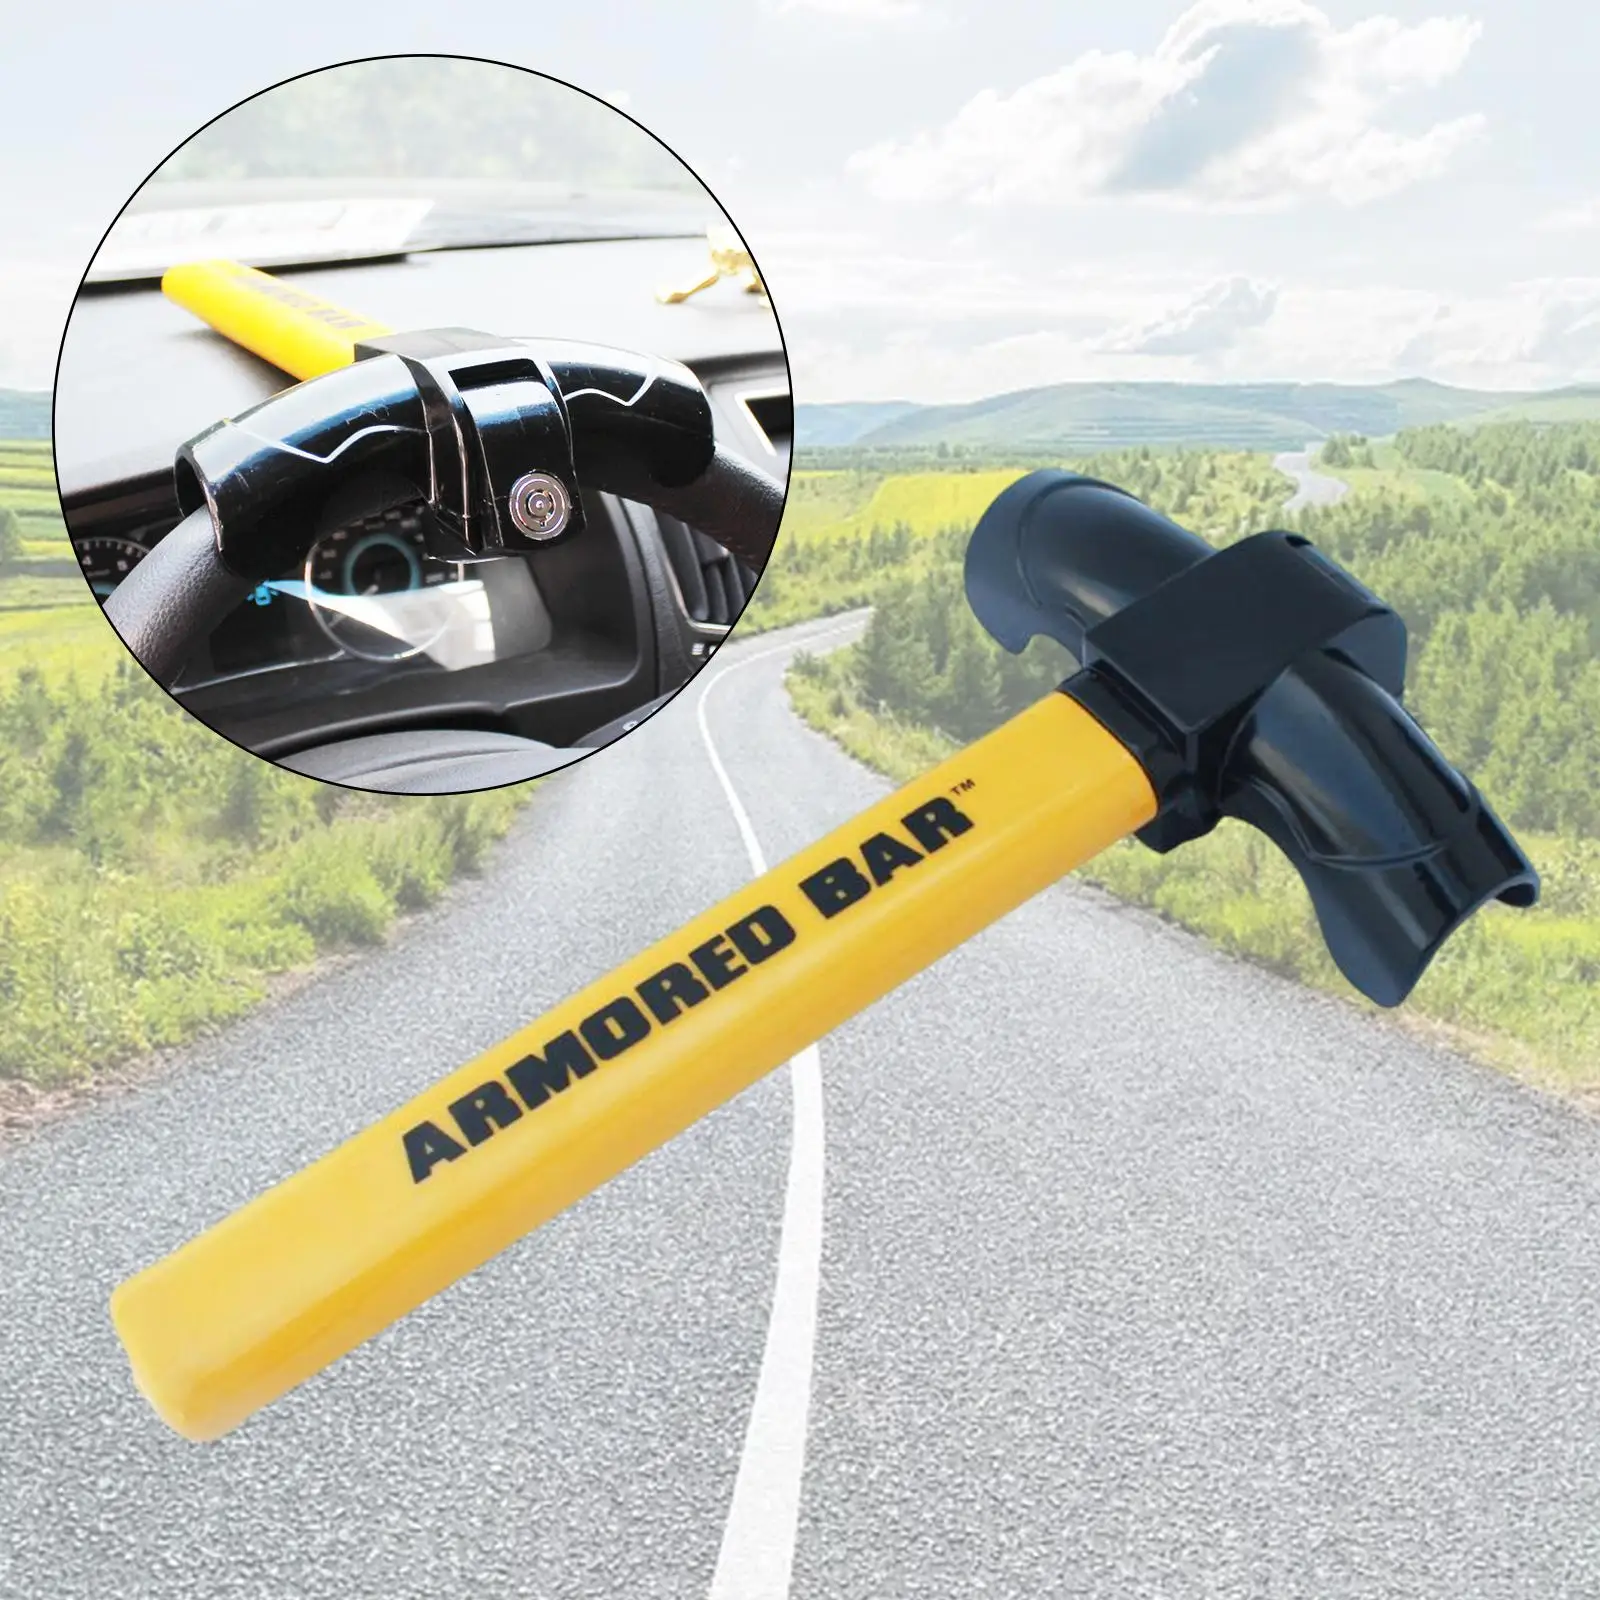 Car Steering Wheel Lock with 2Pcs Keys Sturdy Anti Theft Security Lock Universal Convenient T Shaped for Van Truck Cars SUV